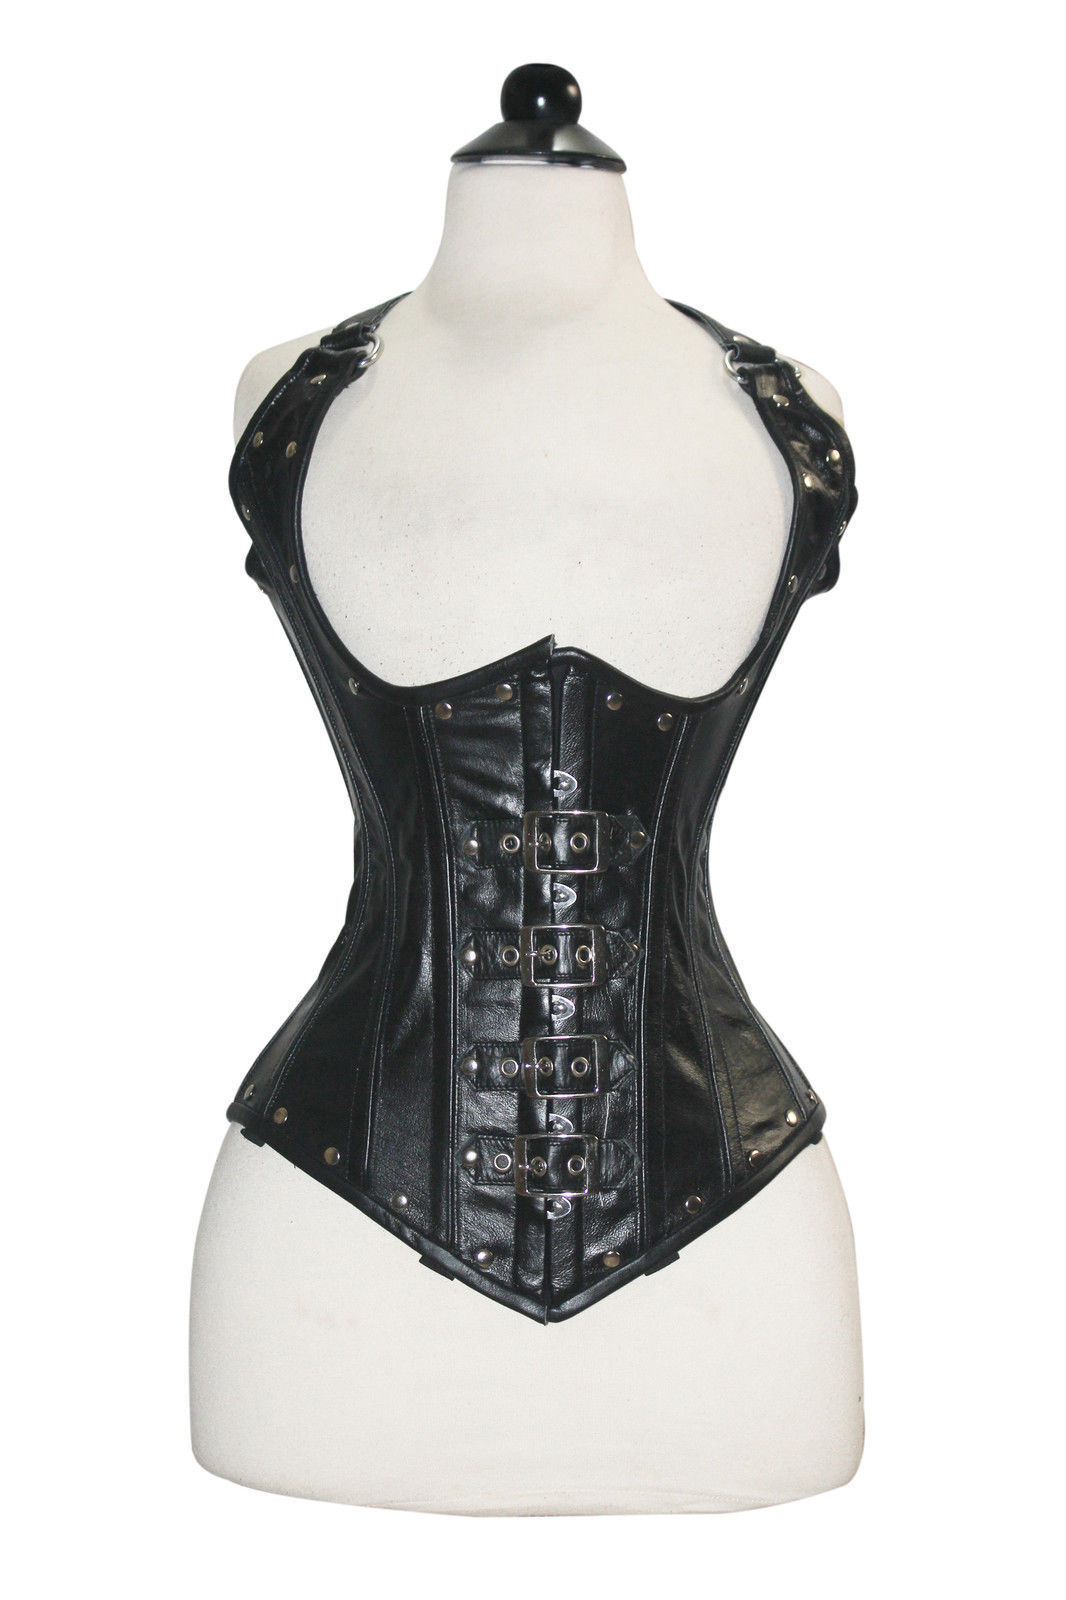 Cup-less-Steampunk-Waist-Shaper-Black-Real Leather Corset